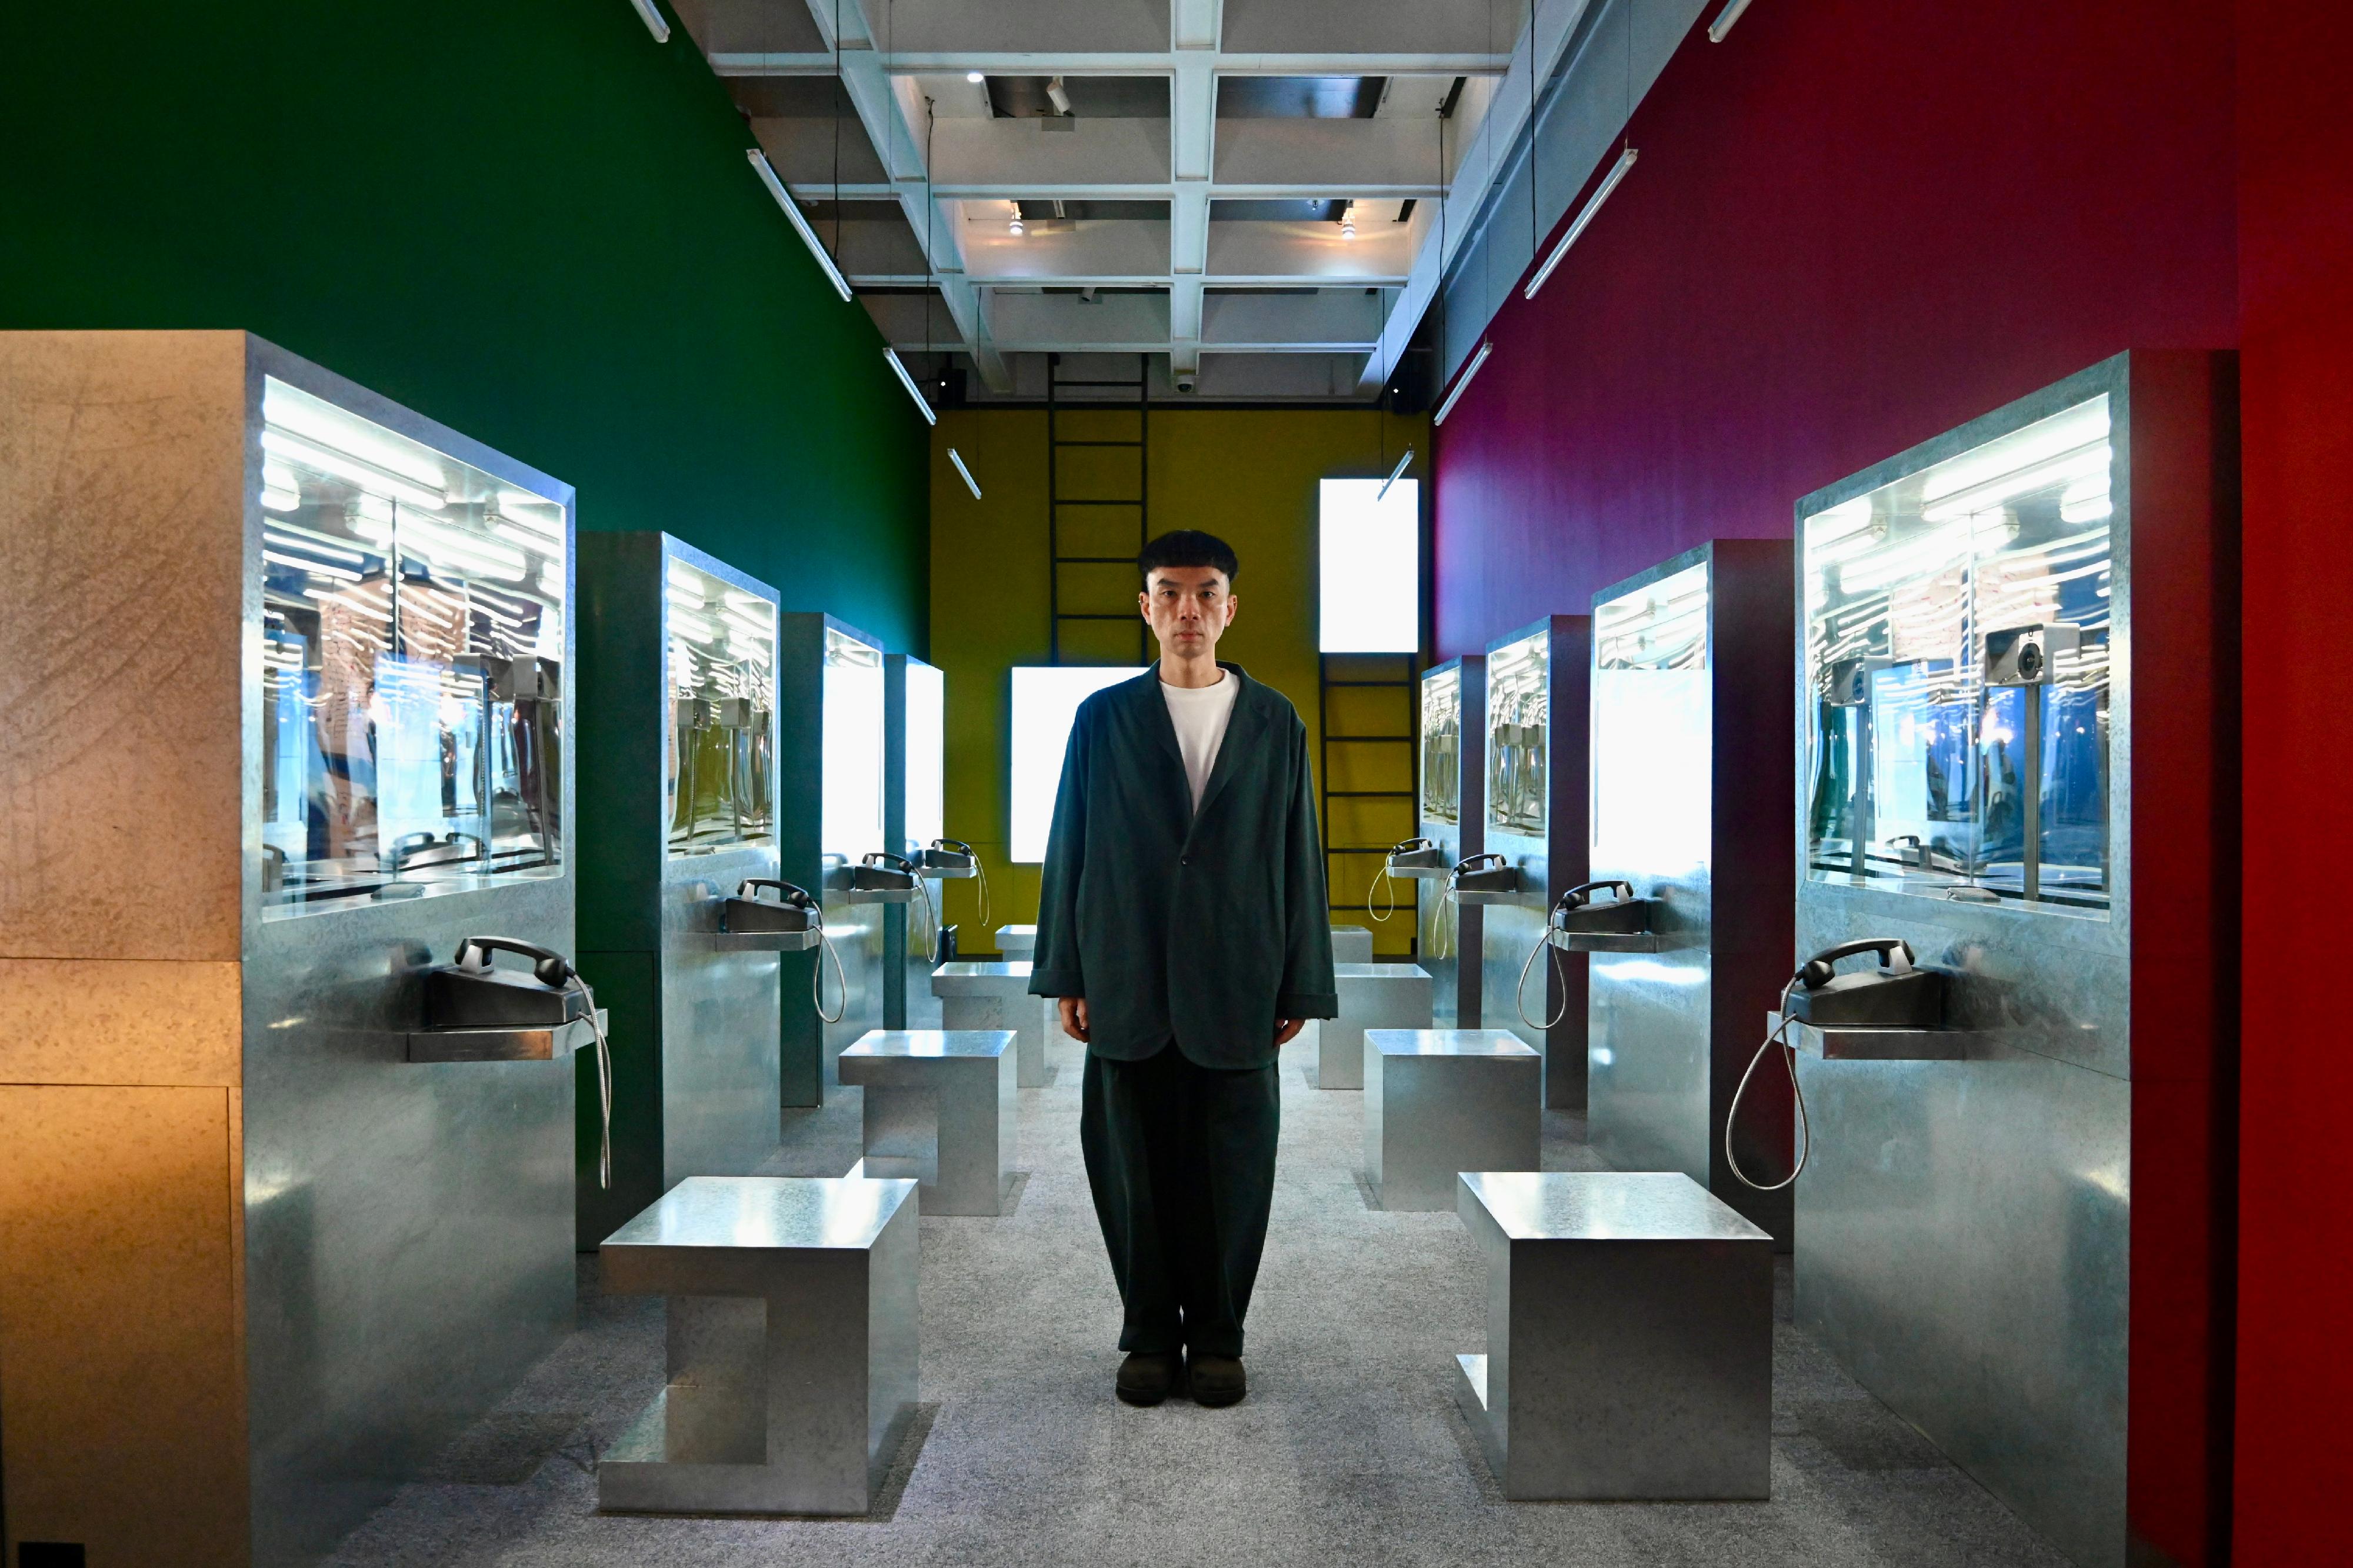 "The Hong Kong Jockey Club Series: Joan Miró — The Poetry of Everyday Life" exhibition will be held at the Hong Kong Museum of Art starting from tomorrow (March 3). Picture shows Hong Kong new media artist GayBird and his artwork, "Bird Code", which complements the exhibition with a unique Hong Kong viewpoint.